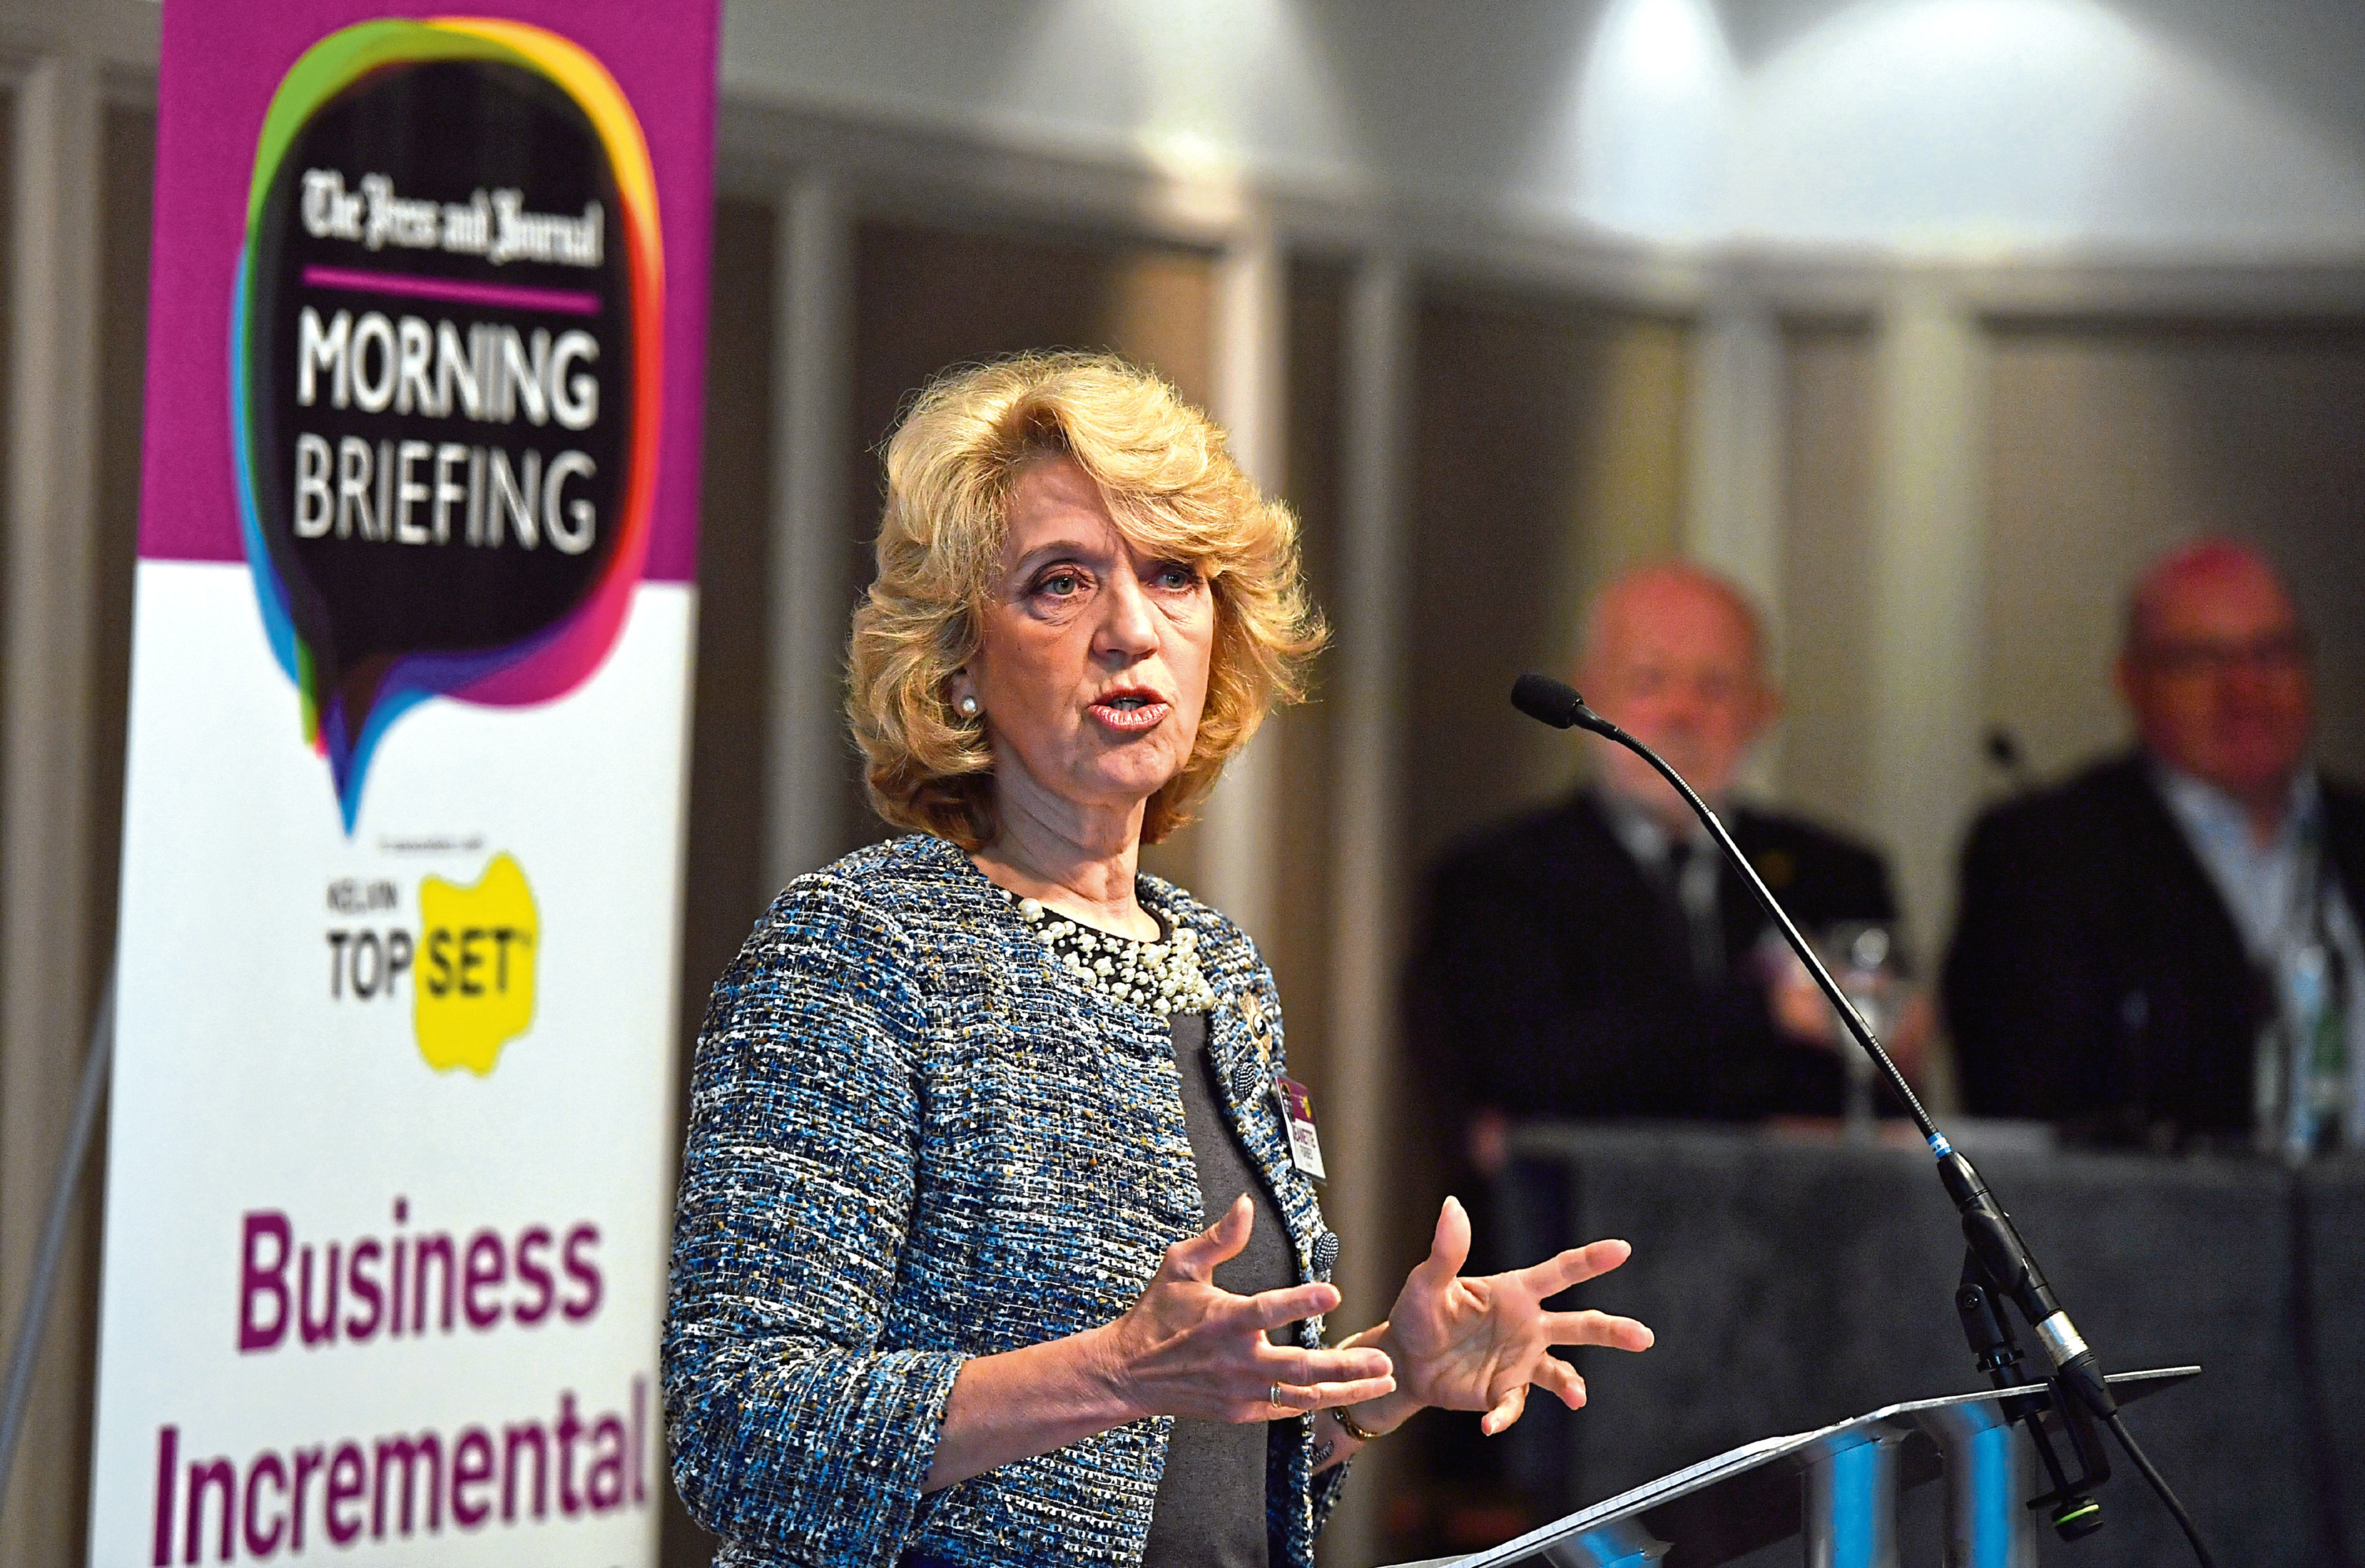 Press and Journal Morning Briefing (business breakfast) at the Marcliffe Hotel ; 
Pictured - Panellist, Jeanette Forbes, CEO, PCL Group, speaking.      
Picture by Kami Thomson  /